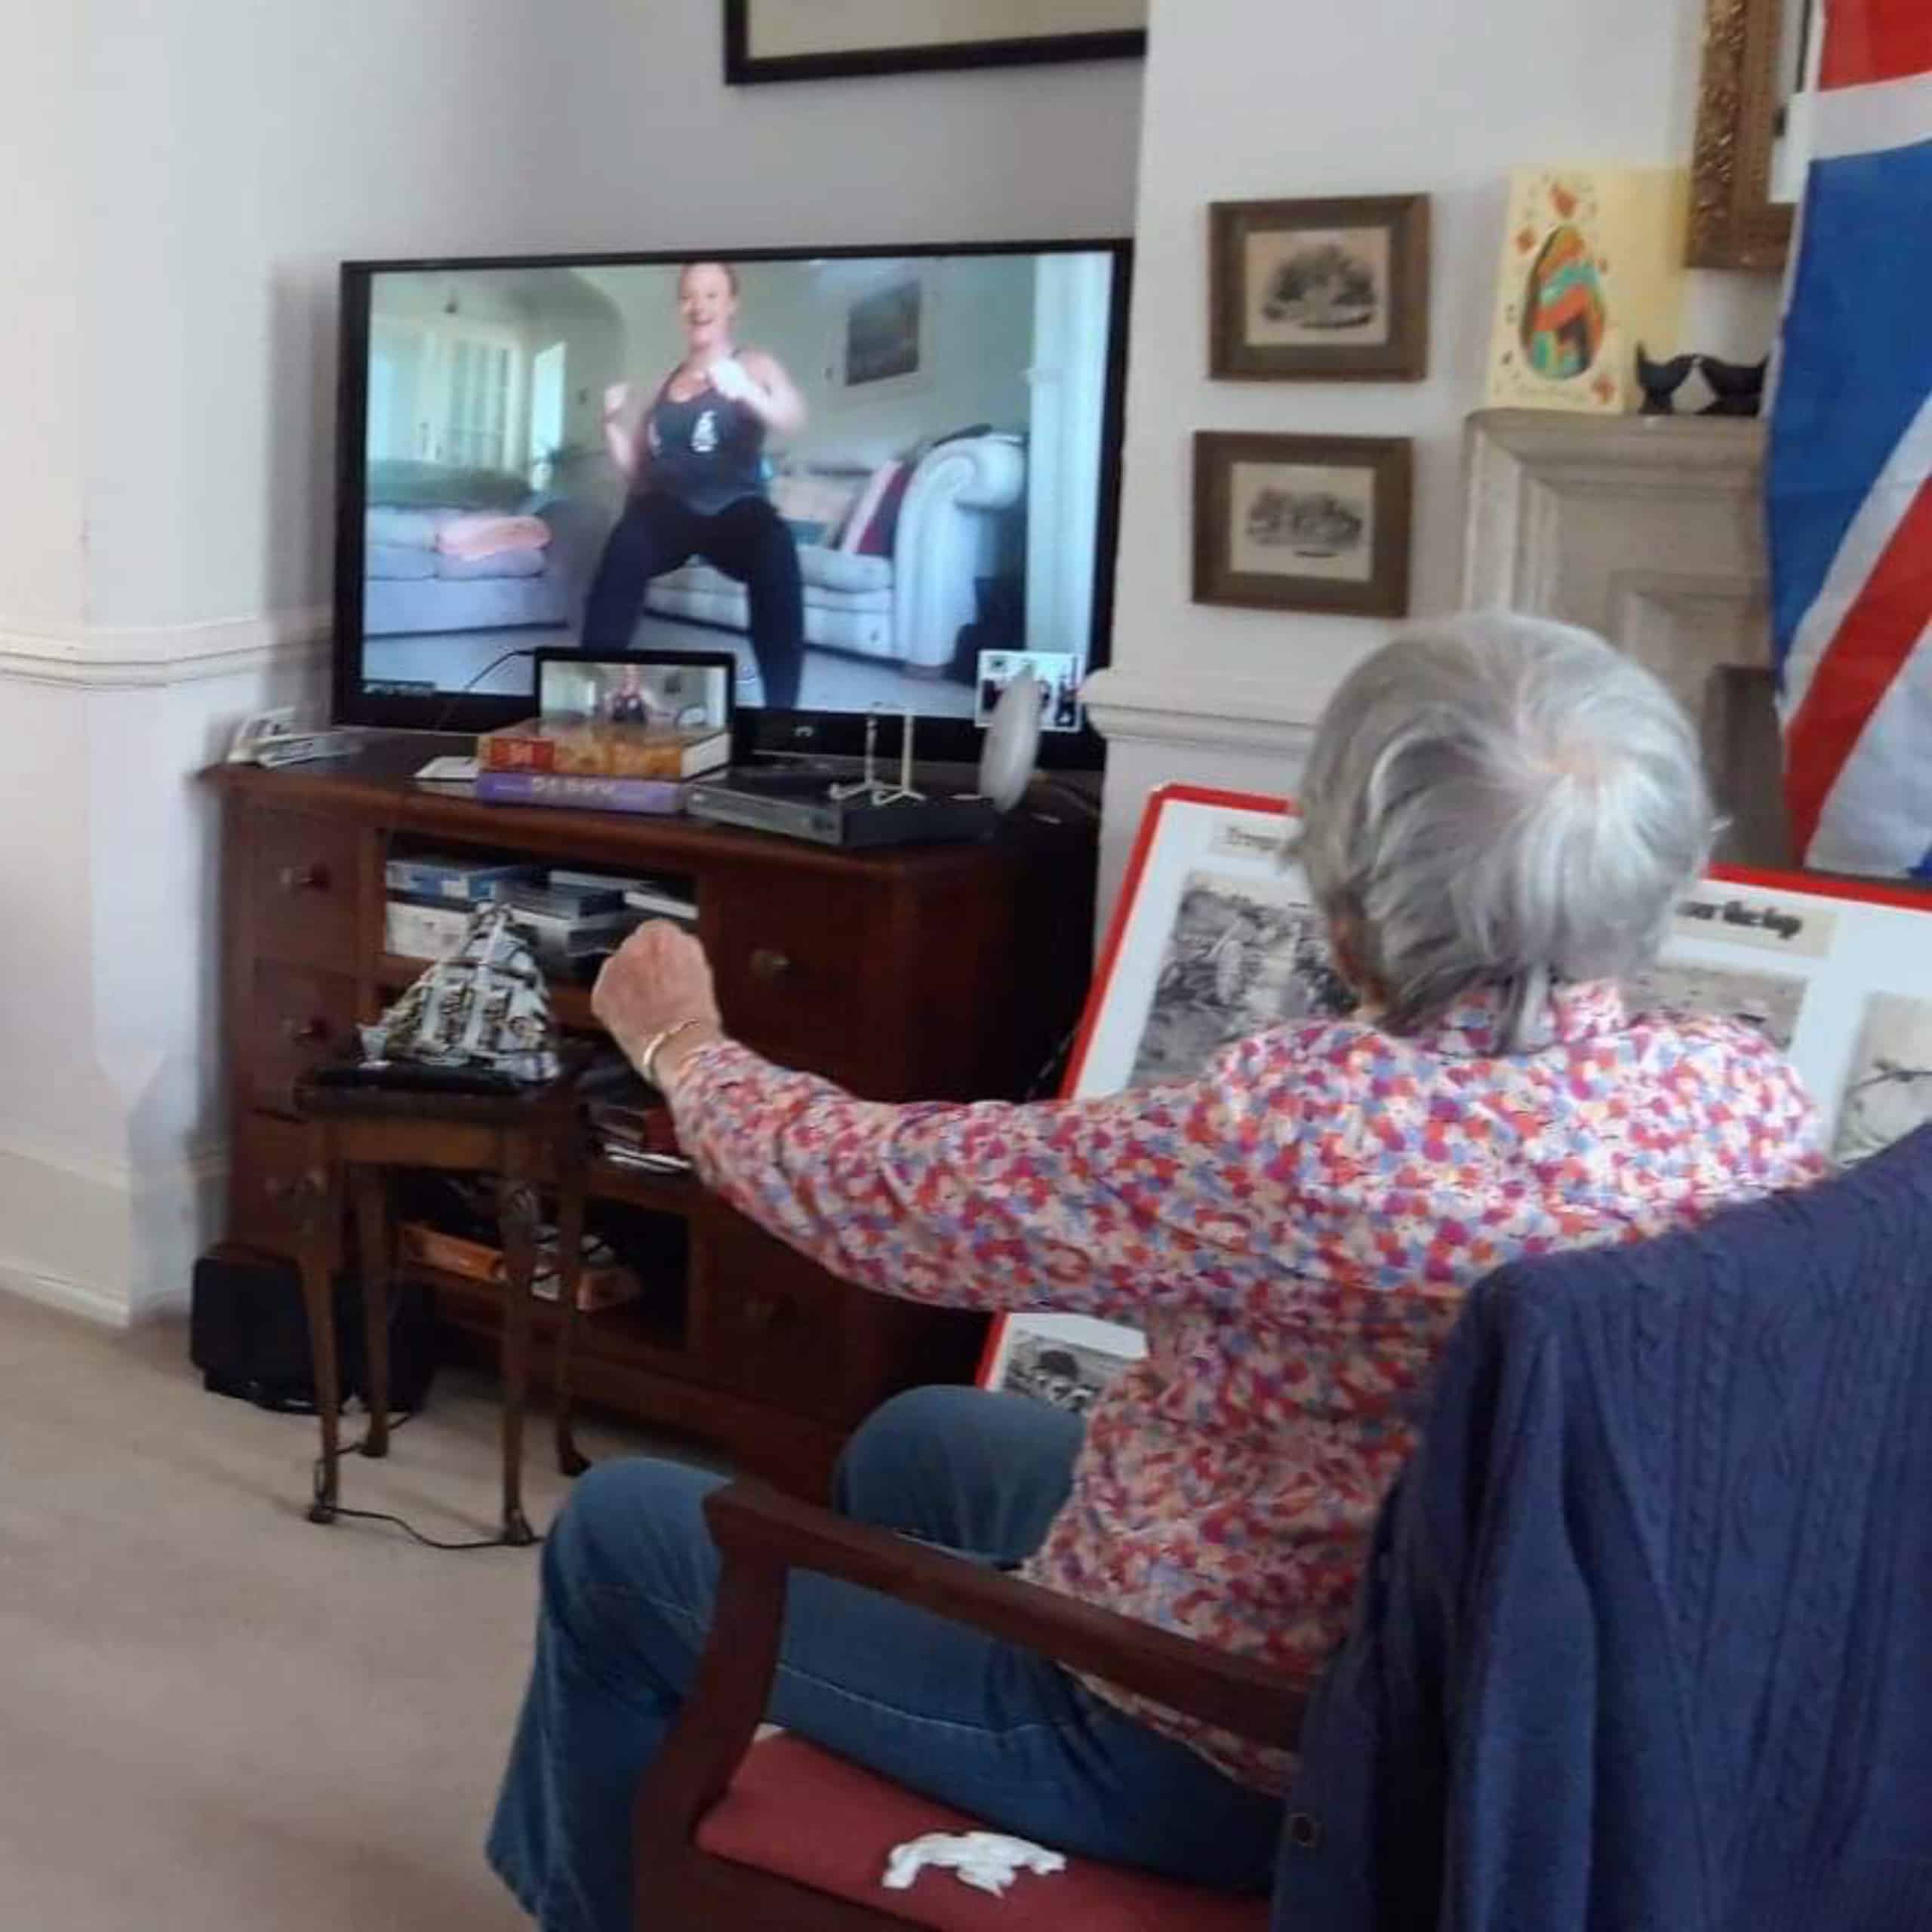 A Wren House resident taking part in the Zoom exercise class.